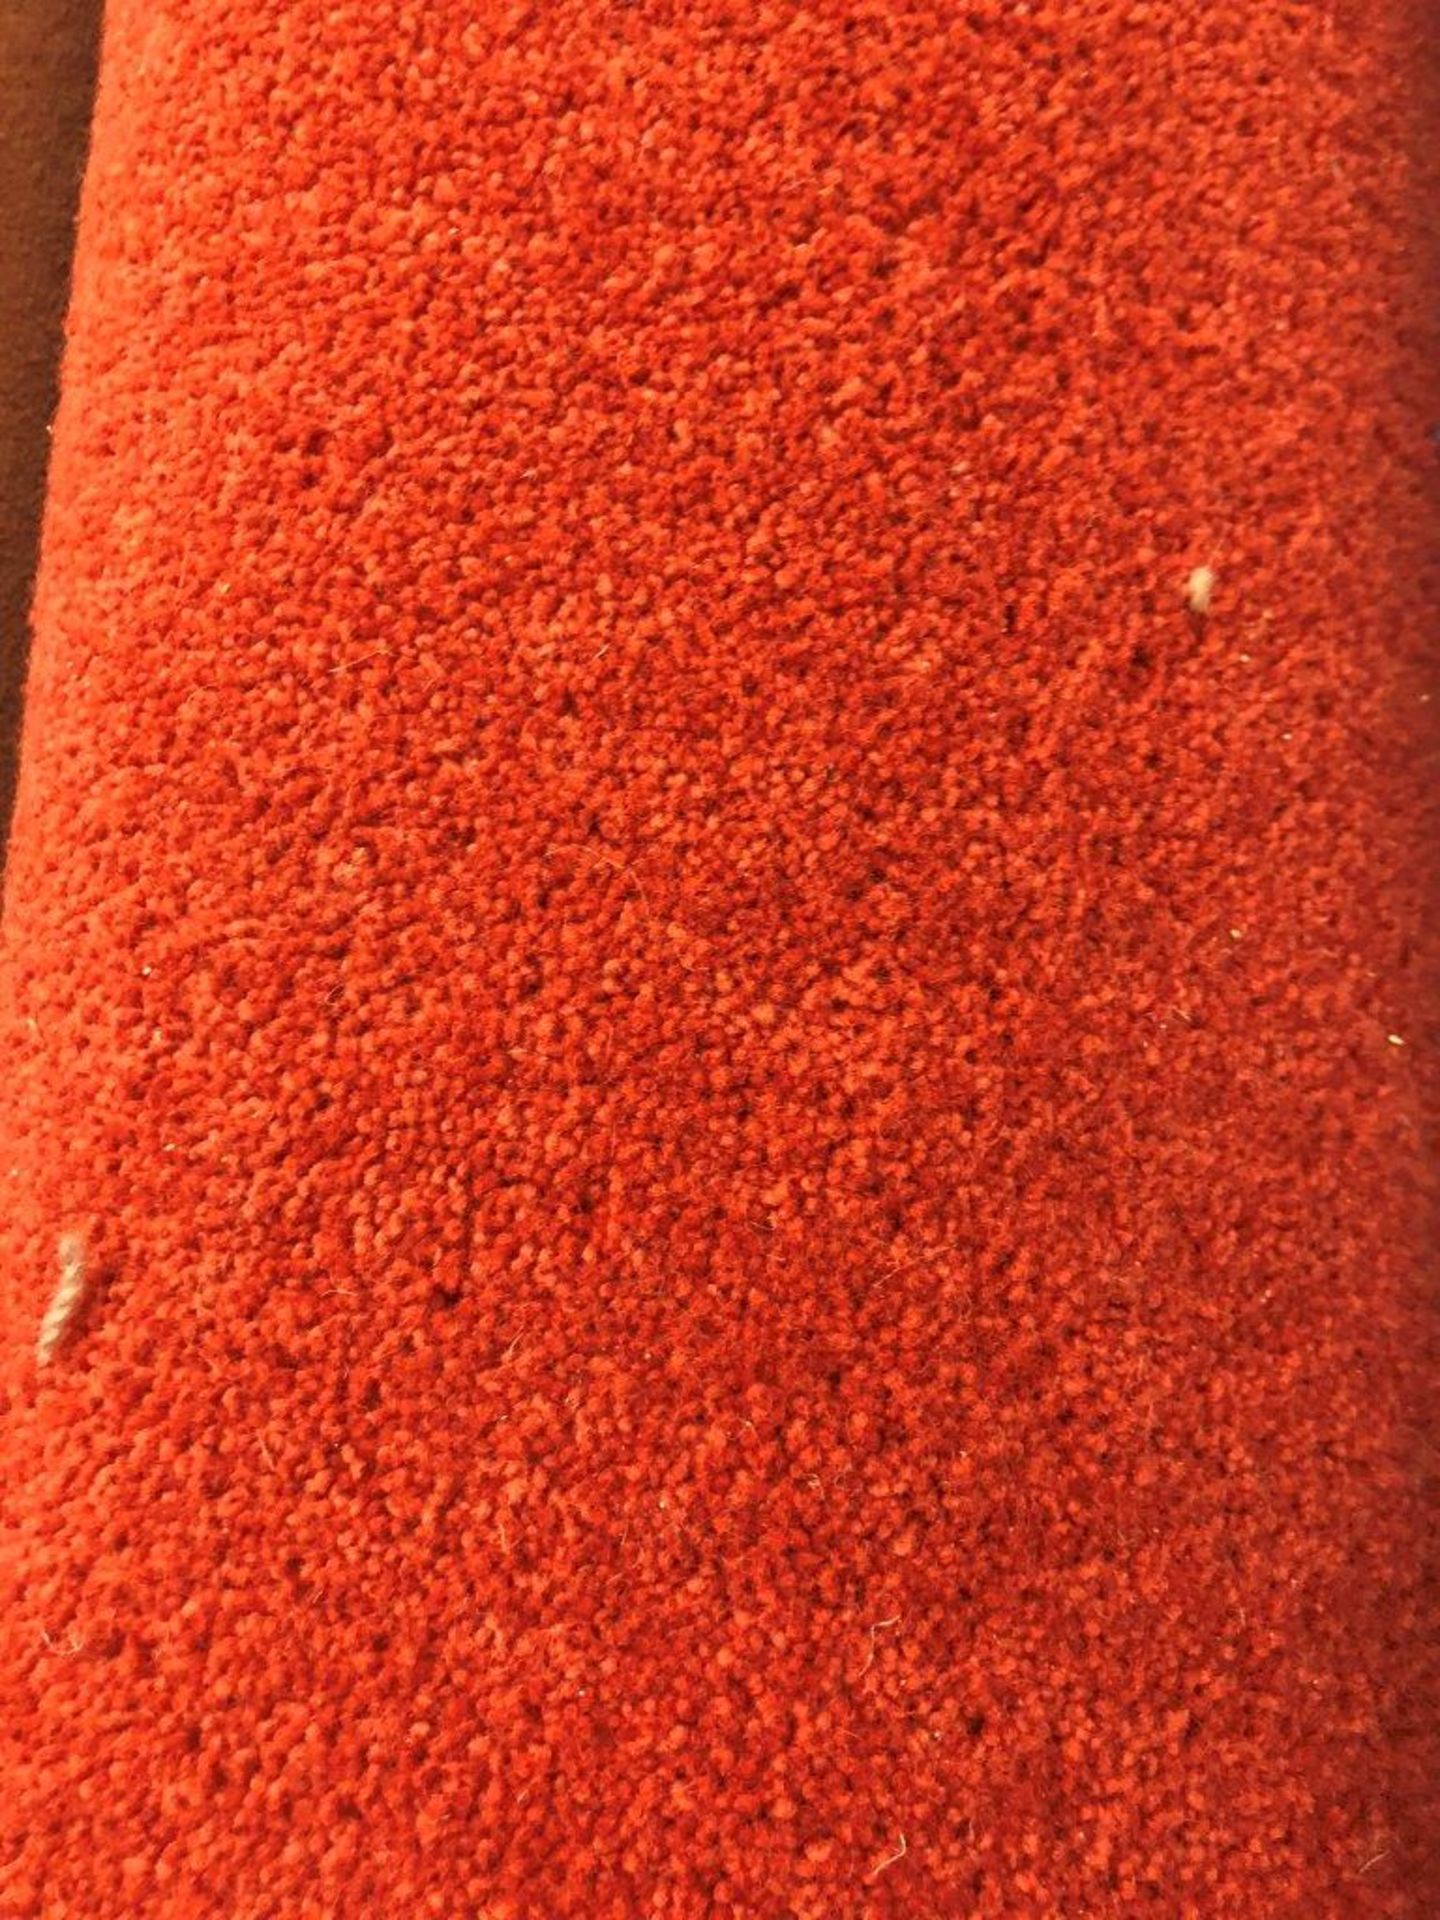 1 x Ryalux Carpet End Roll - Red 2.5x3.7m2 - Image 3 of 3